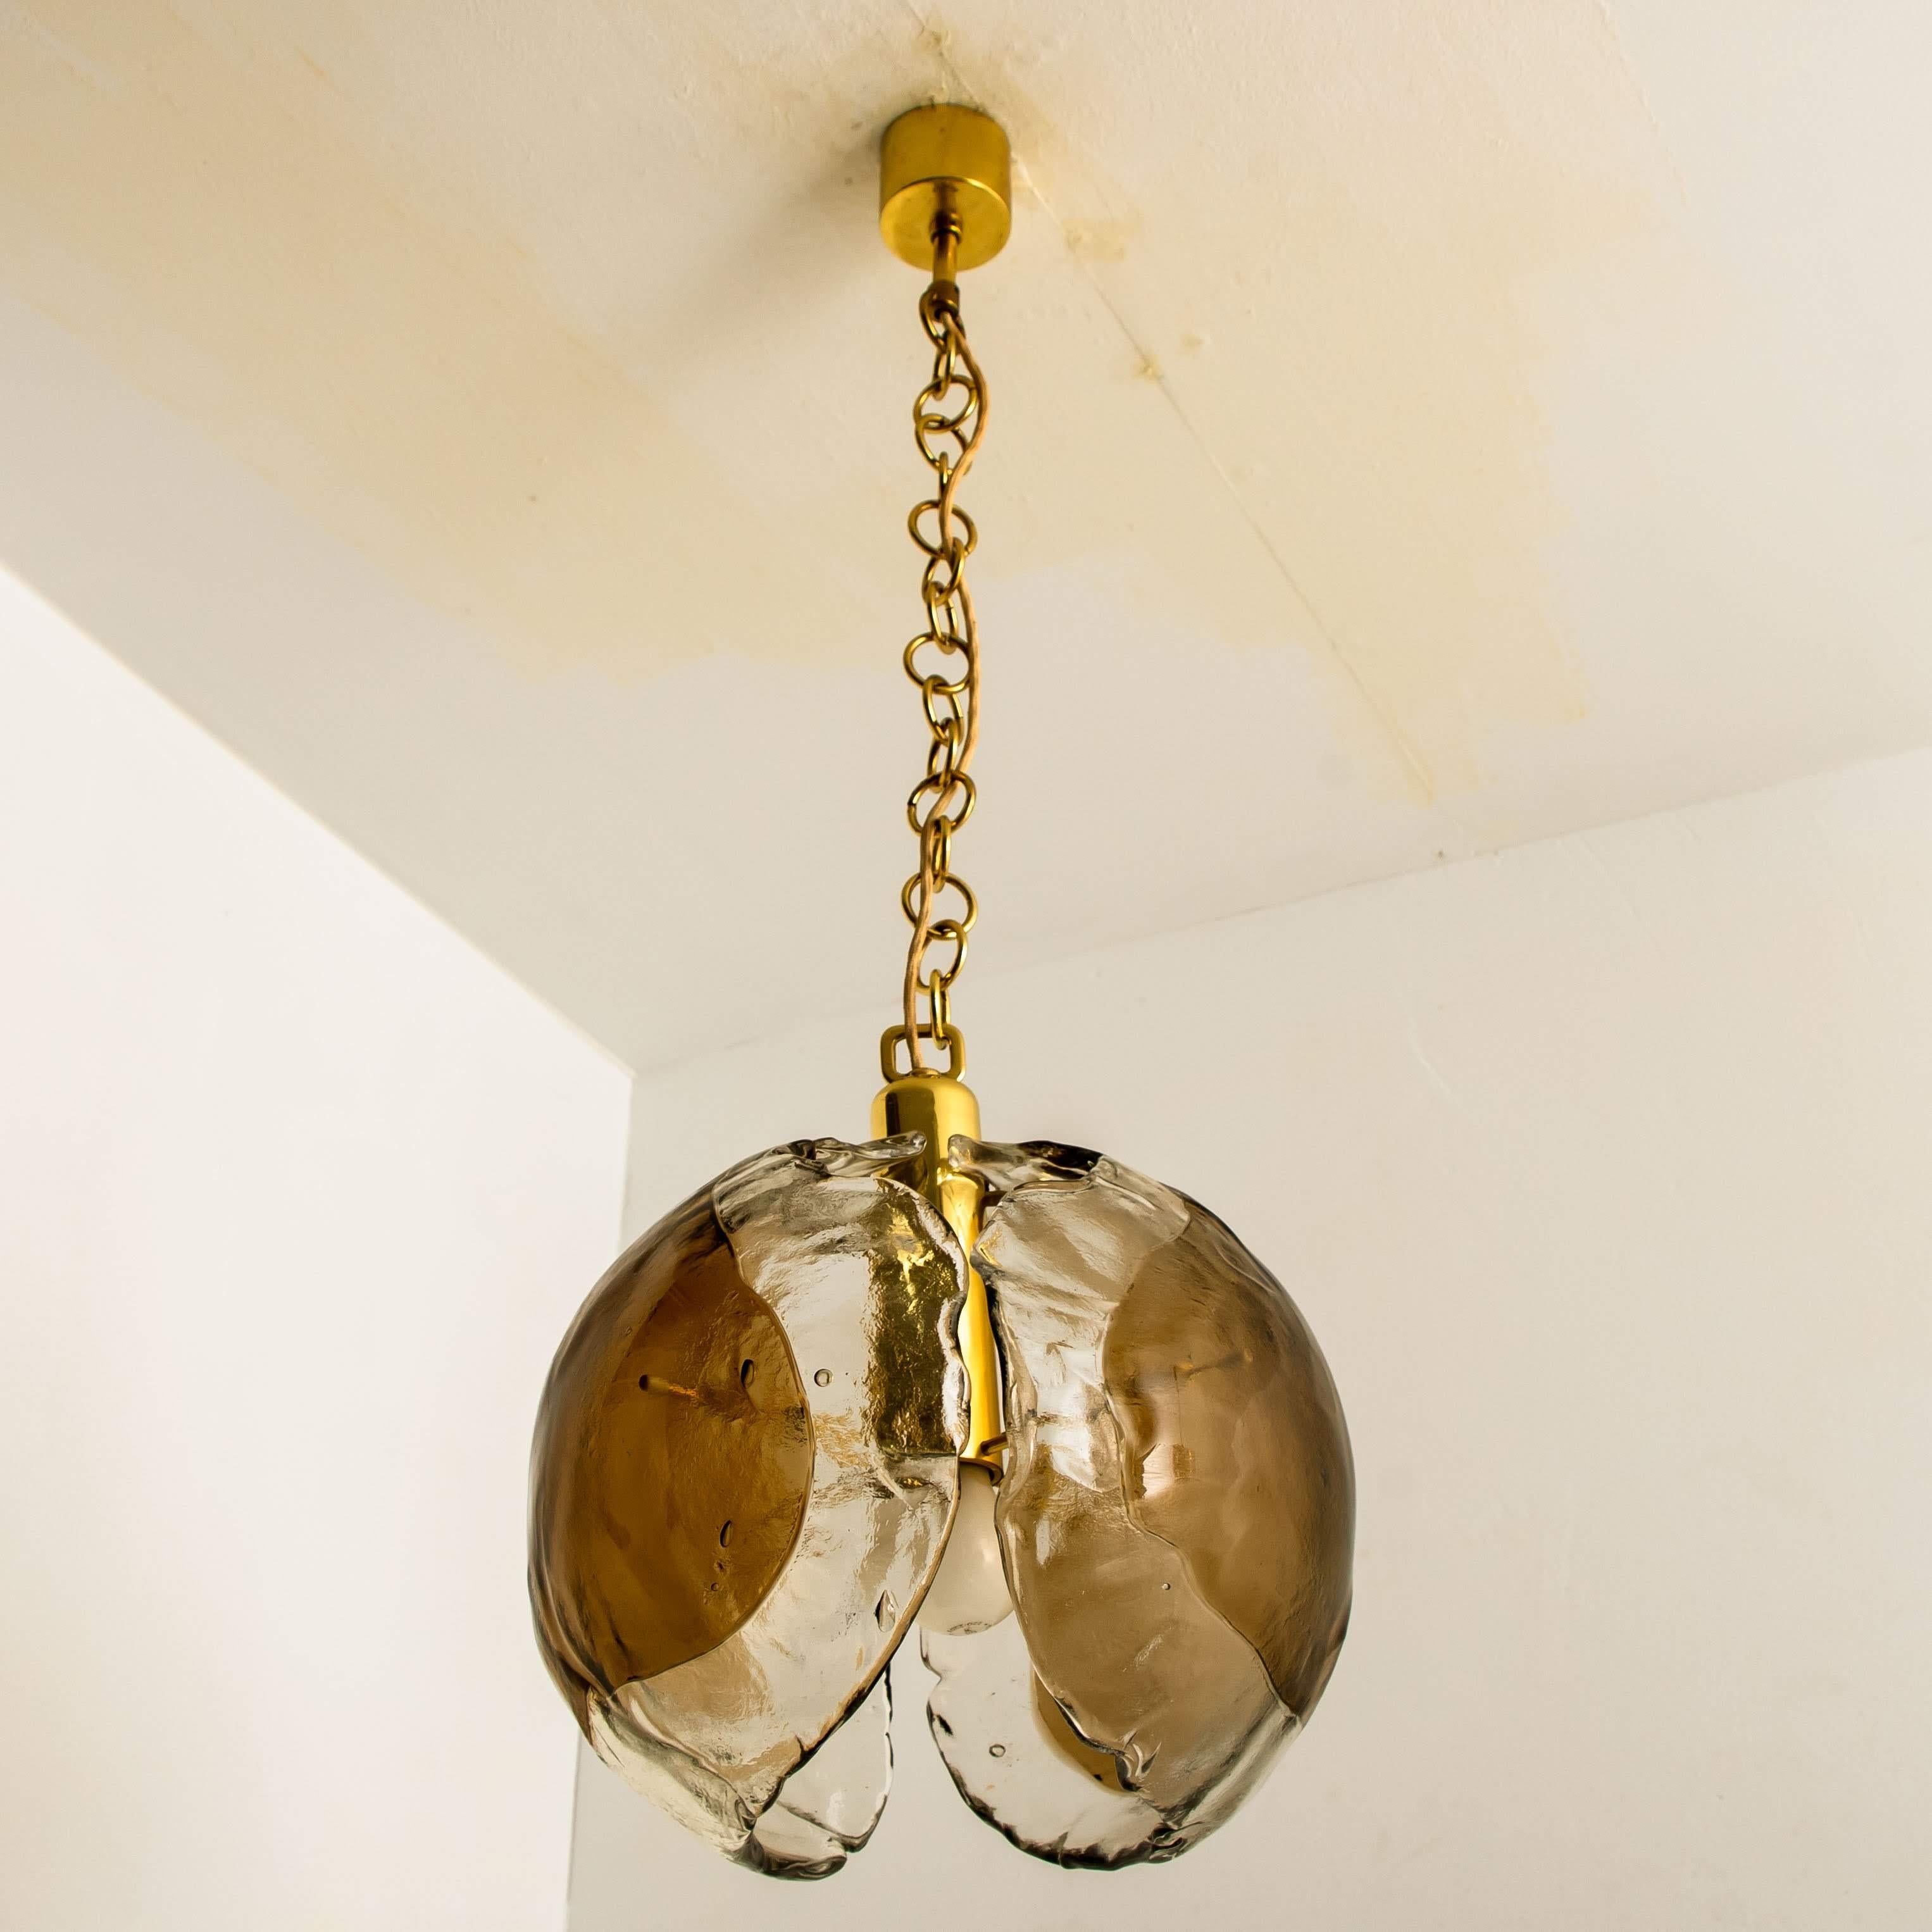 1 of the 3 Kalmar Chandelier Pendant Lights, Smoked Glass and Brass, 1970s For Sale 9